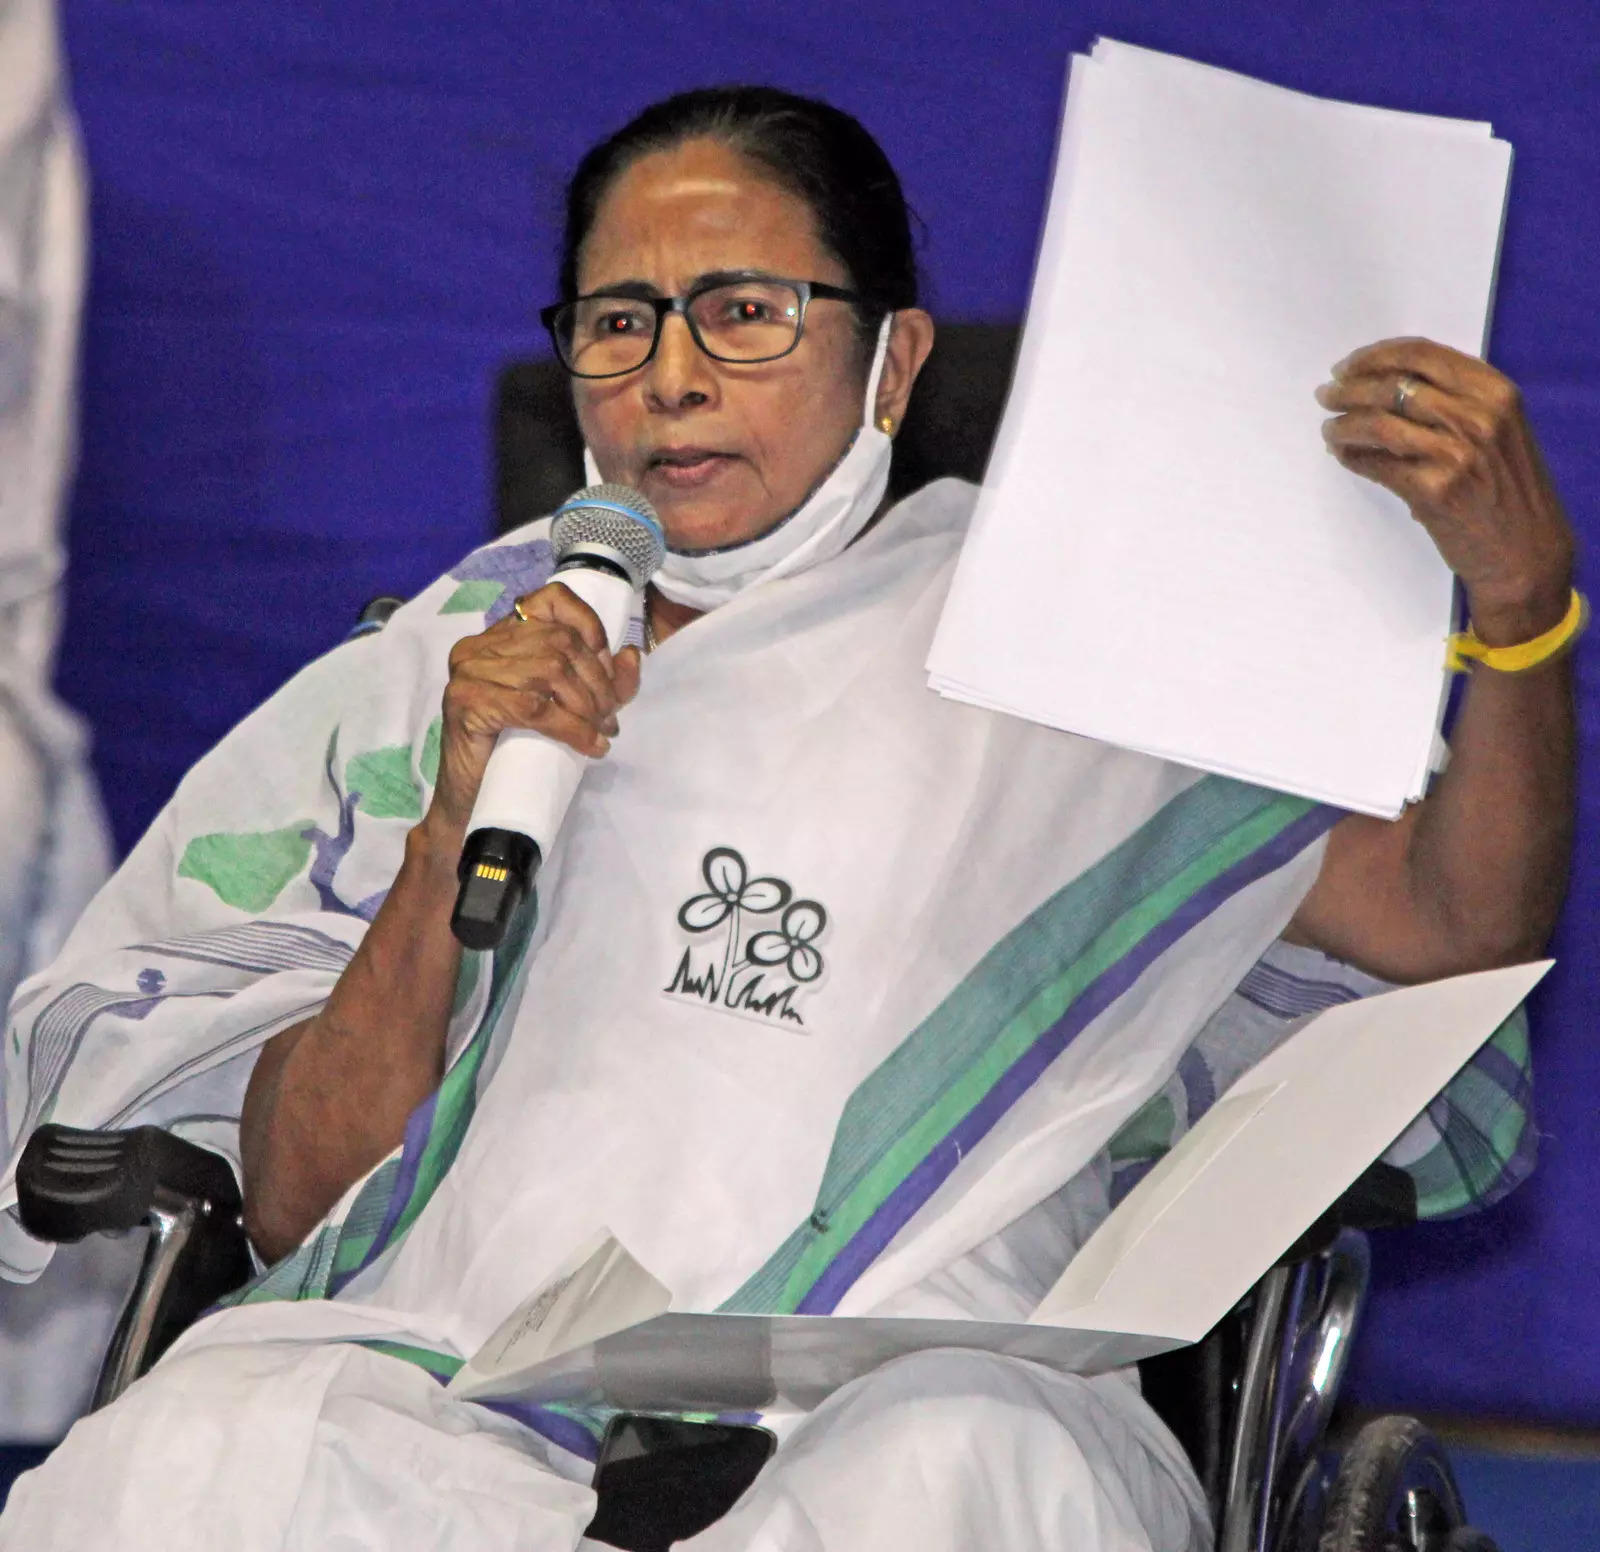 Mamata Banerjee has said that she will move the Supreme Court against the EC special observers.